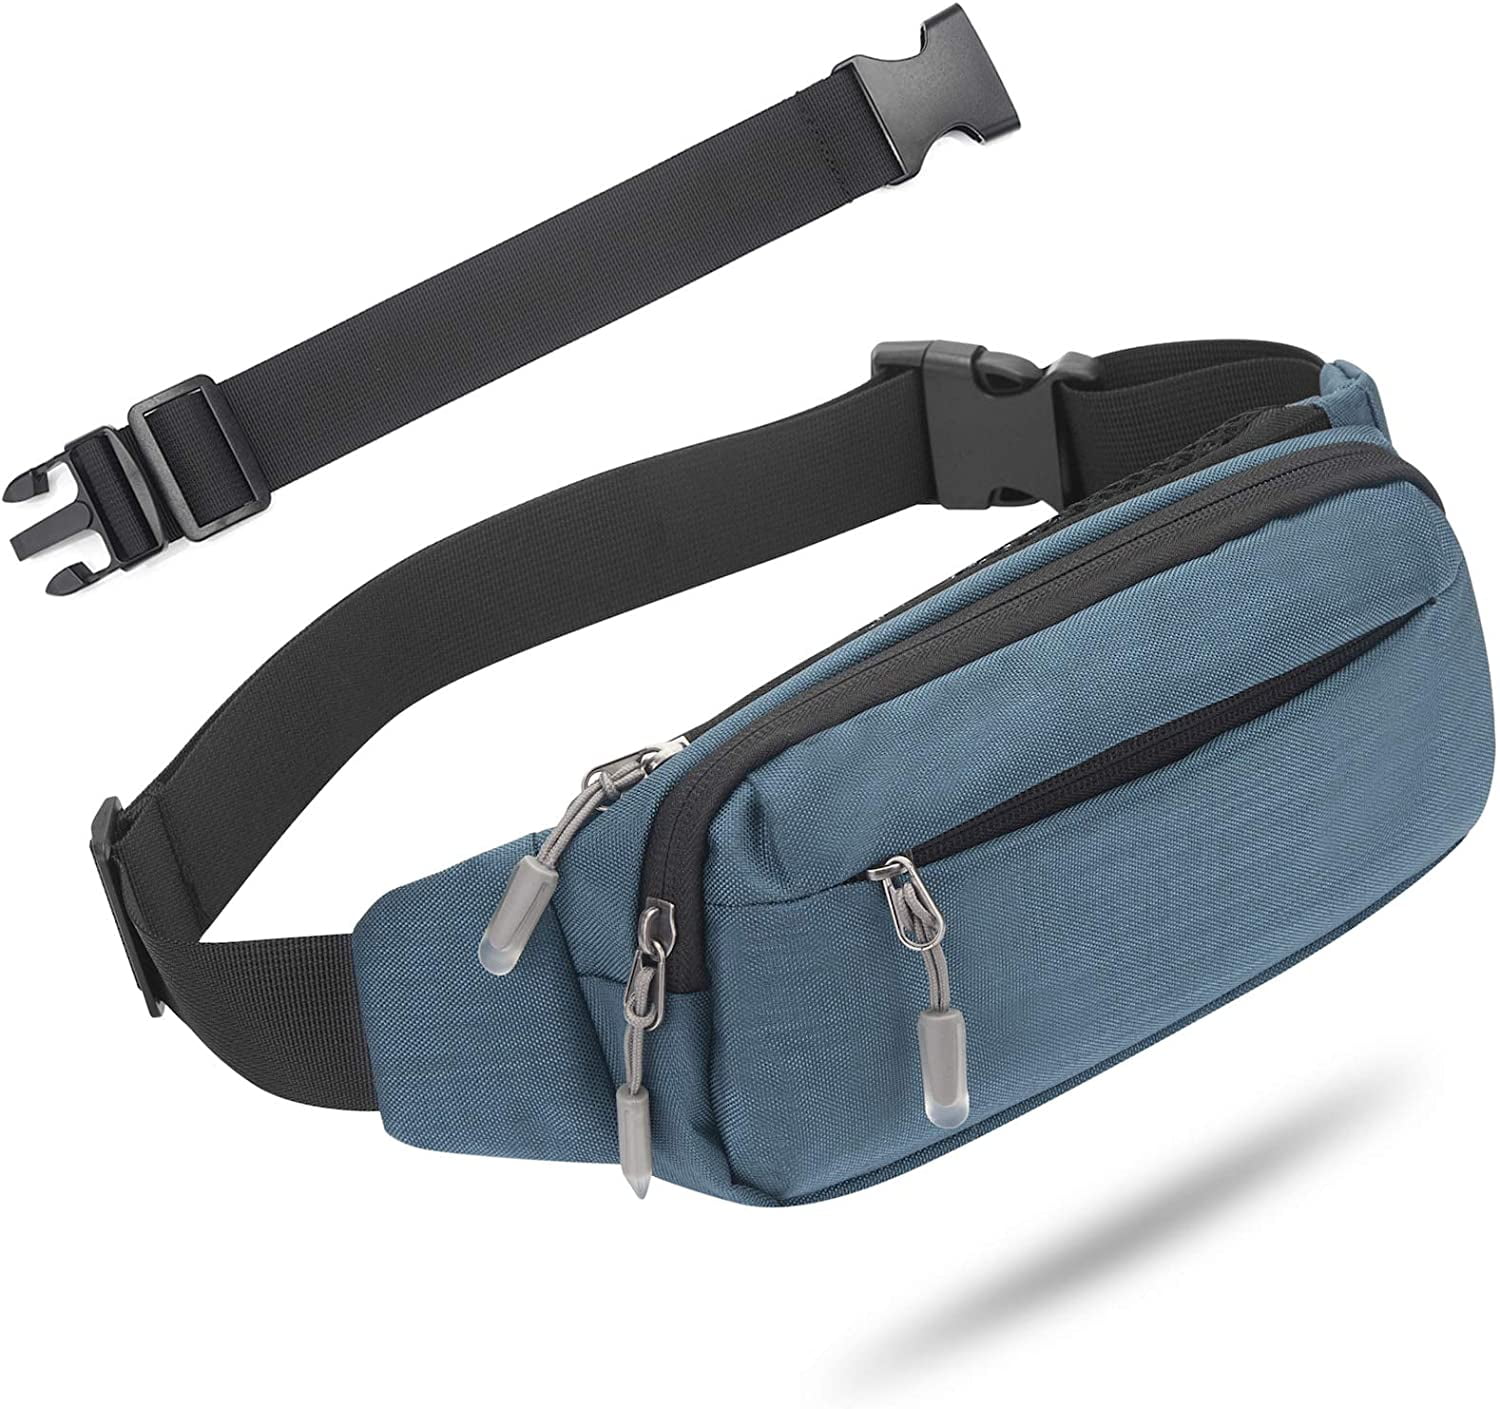 Fanny Pack Waist Packs with Extender for Men Women Waist Pouch Bag Pack with 3 Zipper Pockets Adjustable Straps for Casual Travel Hi Running Outdoor Sports - Walmart.com